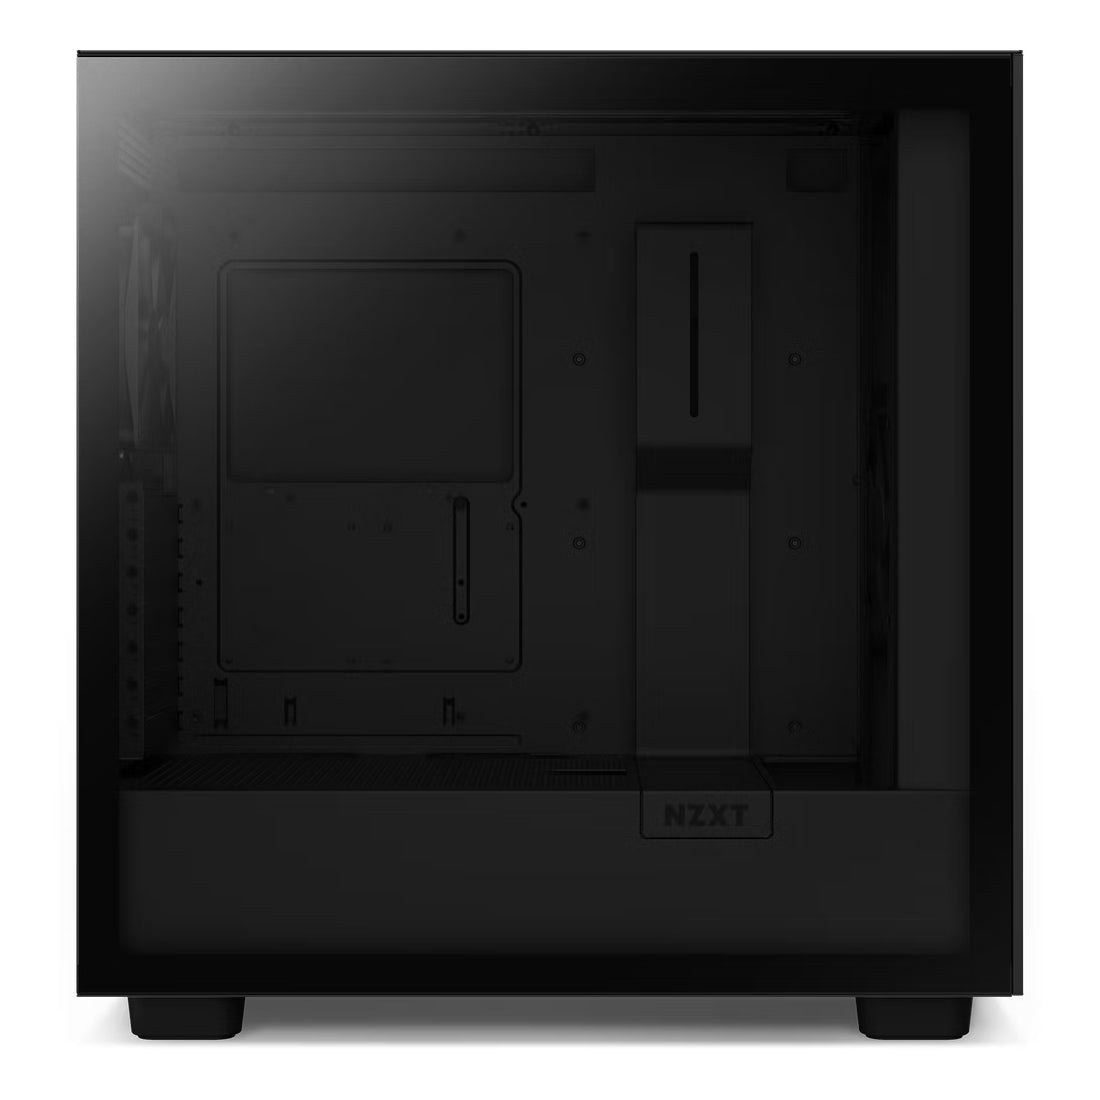 NZXT H7 Flow ATX Mid Tower Case - Black - صندوق - Store 974 | ستور ٩٧٤